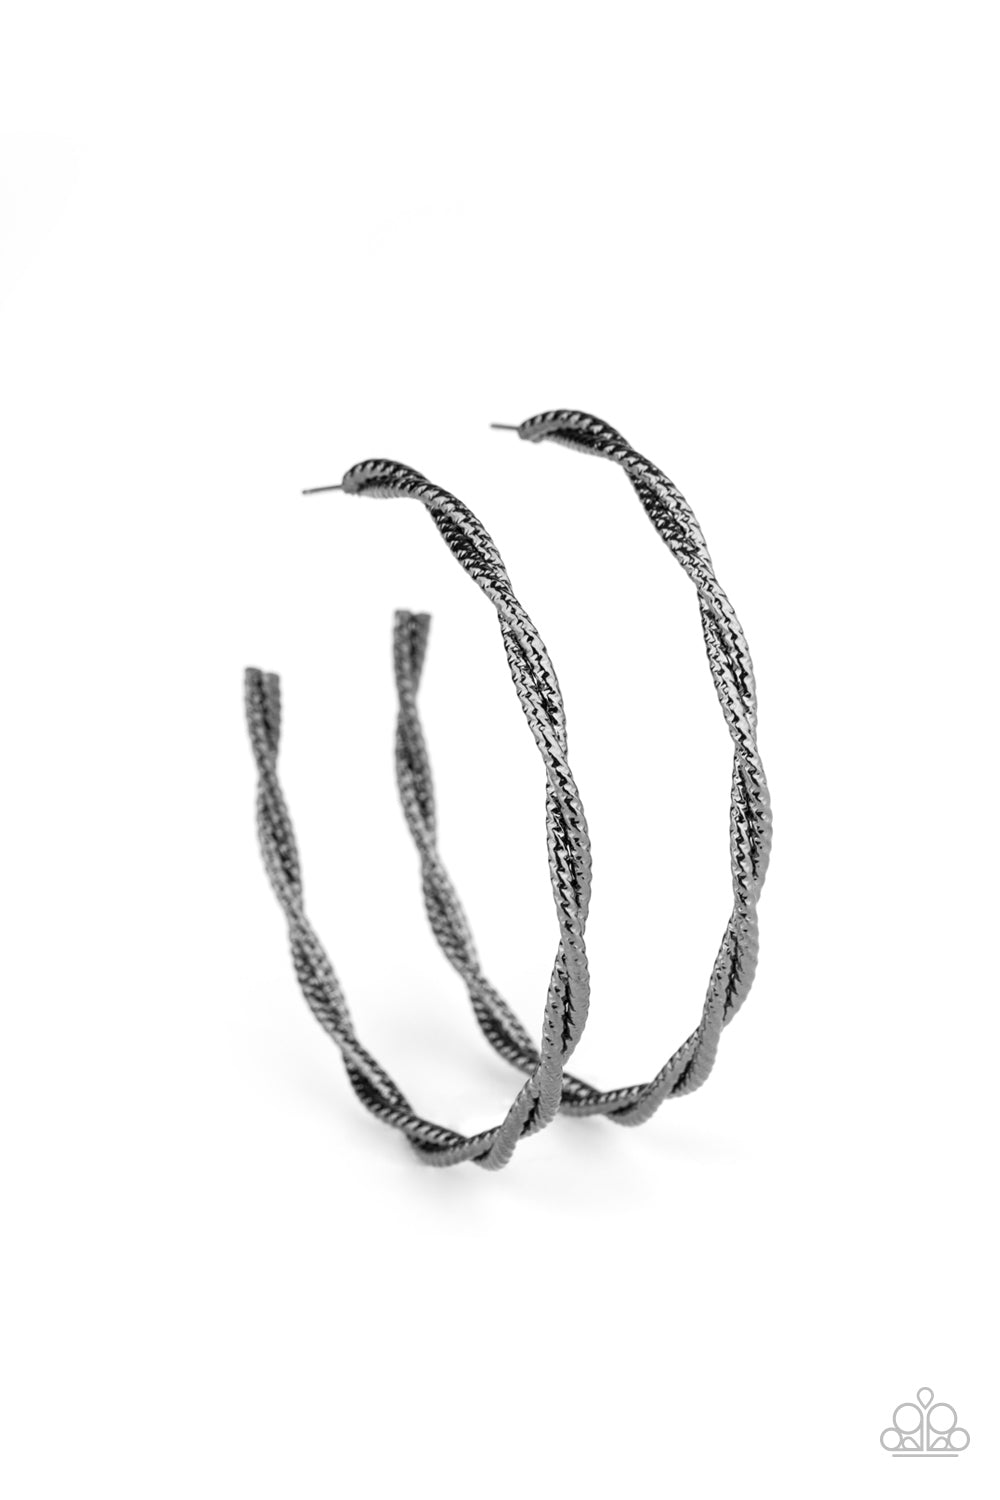 Paparazzi Totally Throttled - Black Hoop Earrings - A Finishing Touch 